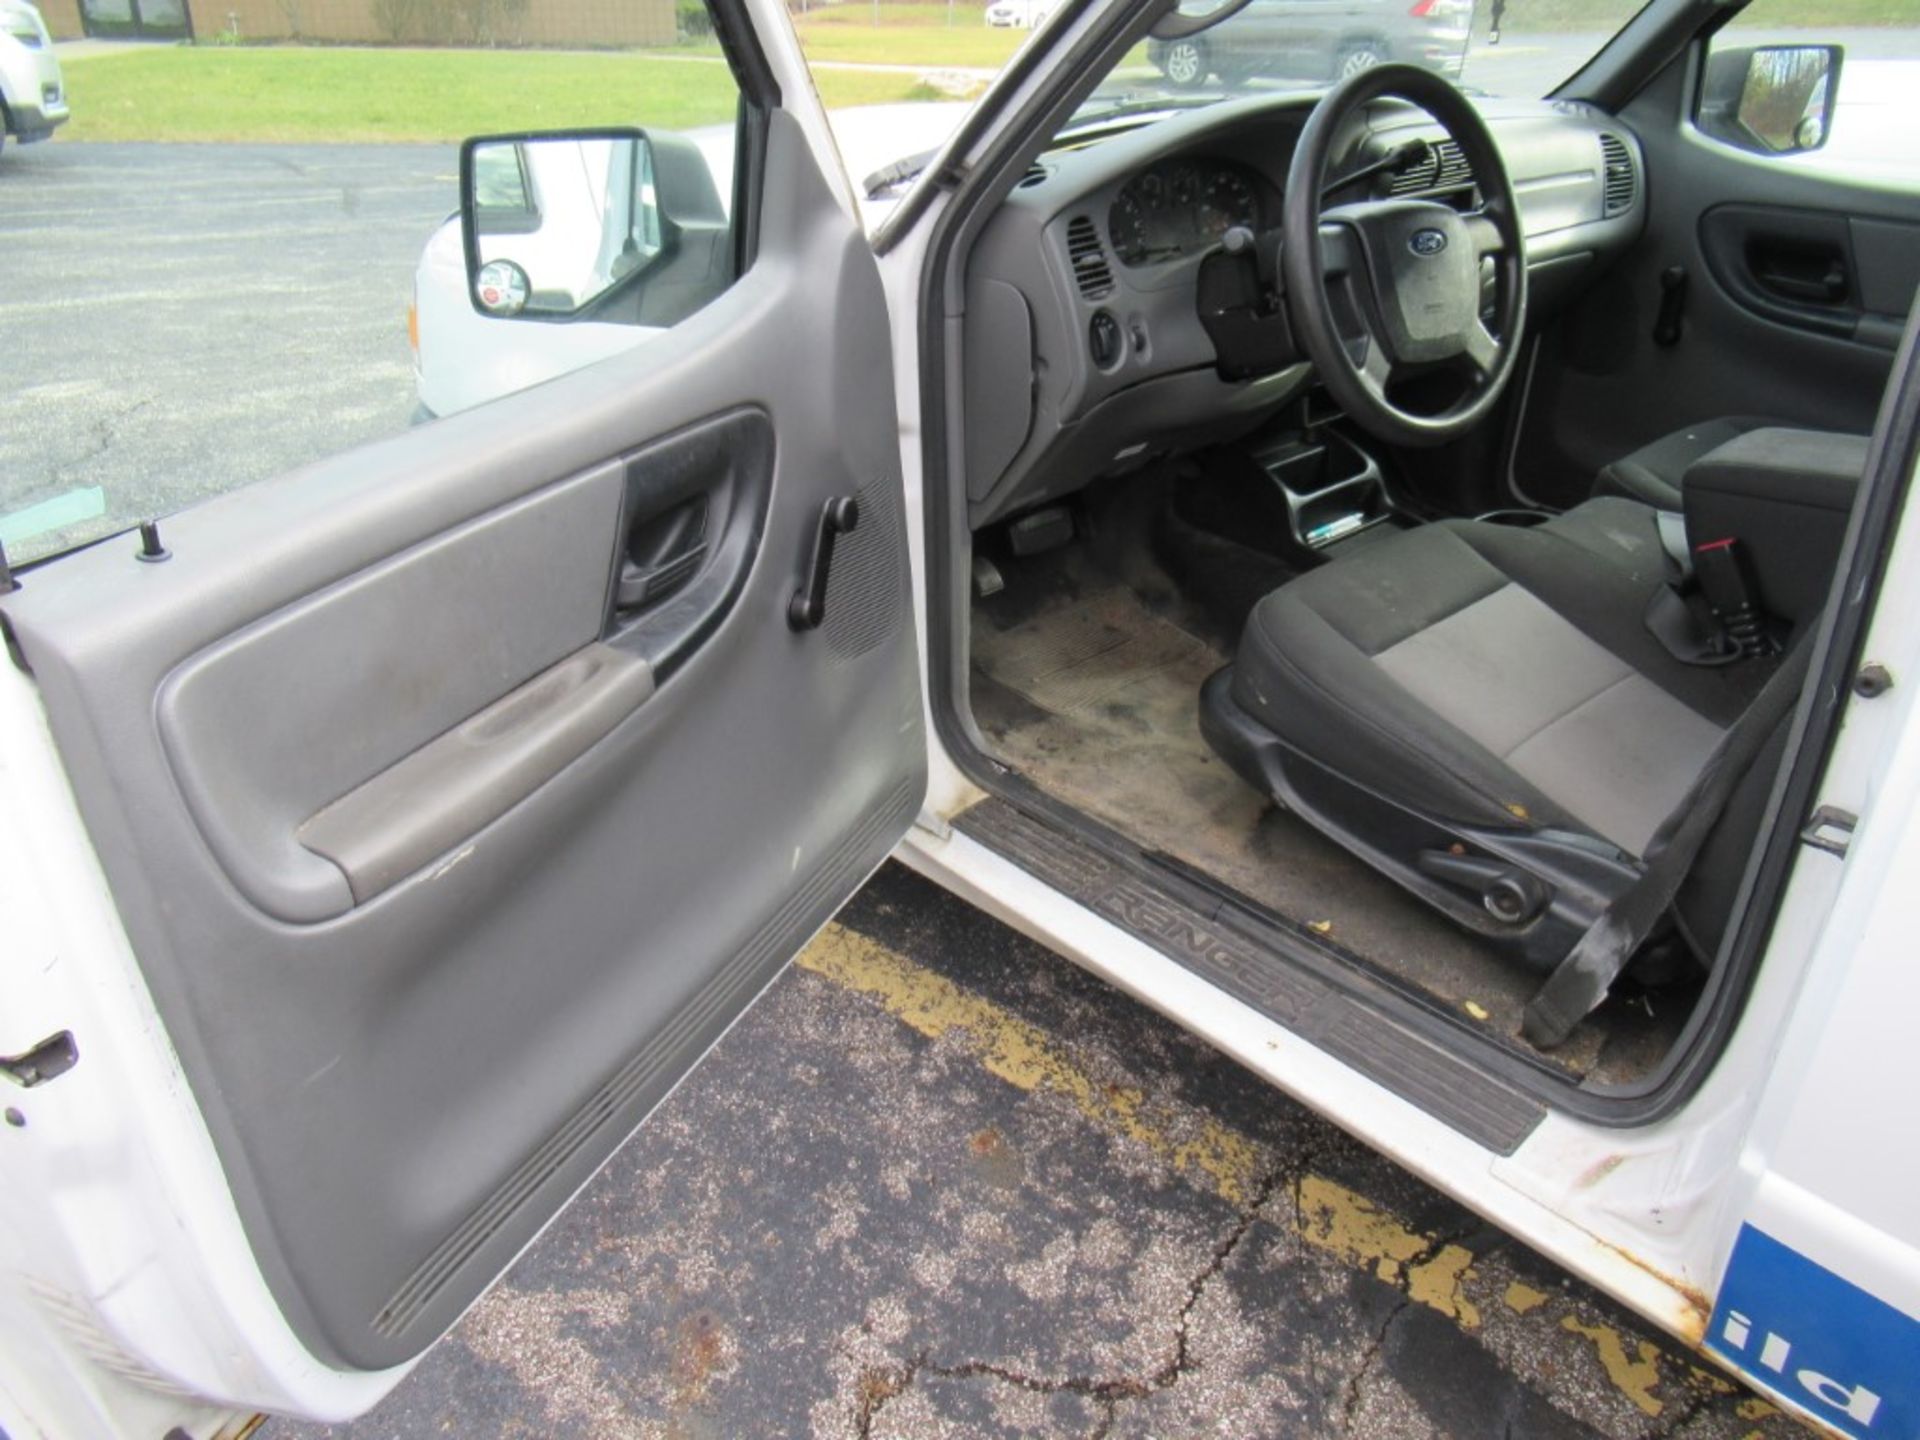 2009 Ford Ranger Pickup, VIN 1FTYR10D29PA65406, Regular Cab, Automatic, AC, AM/FM, Cap, Would Not - Image 18 of 23